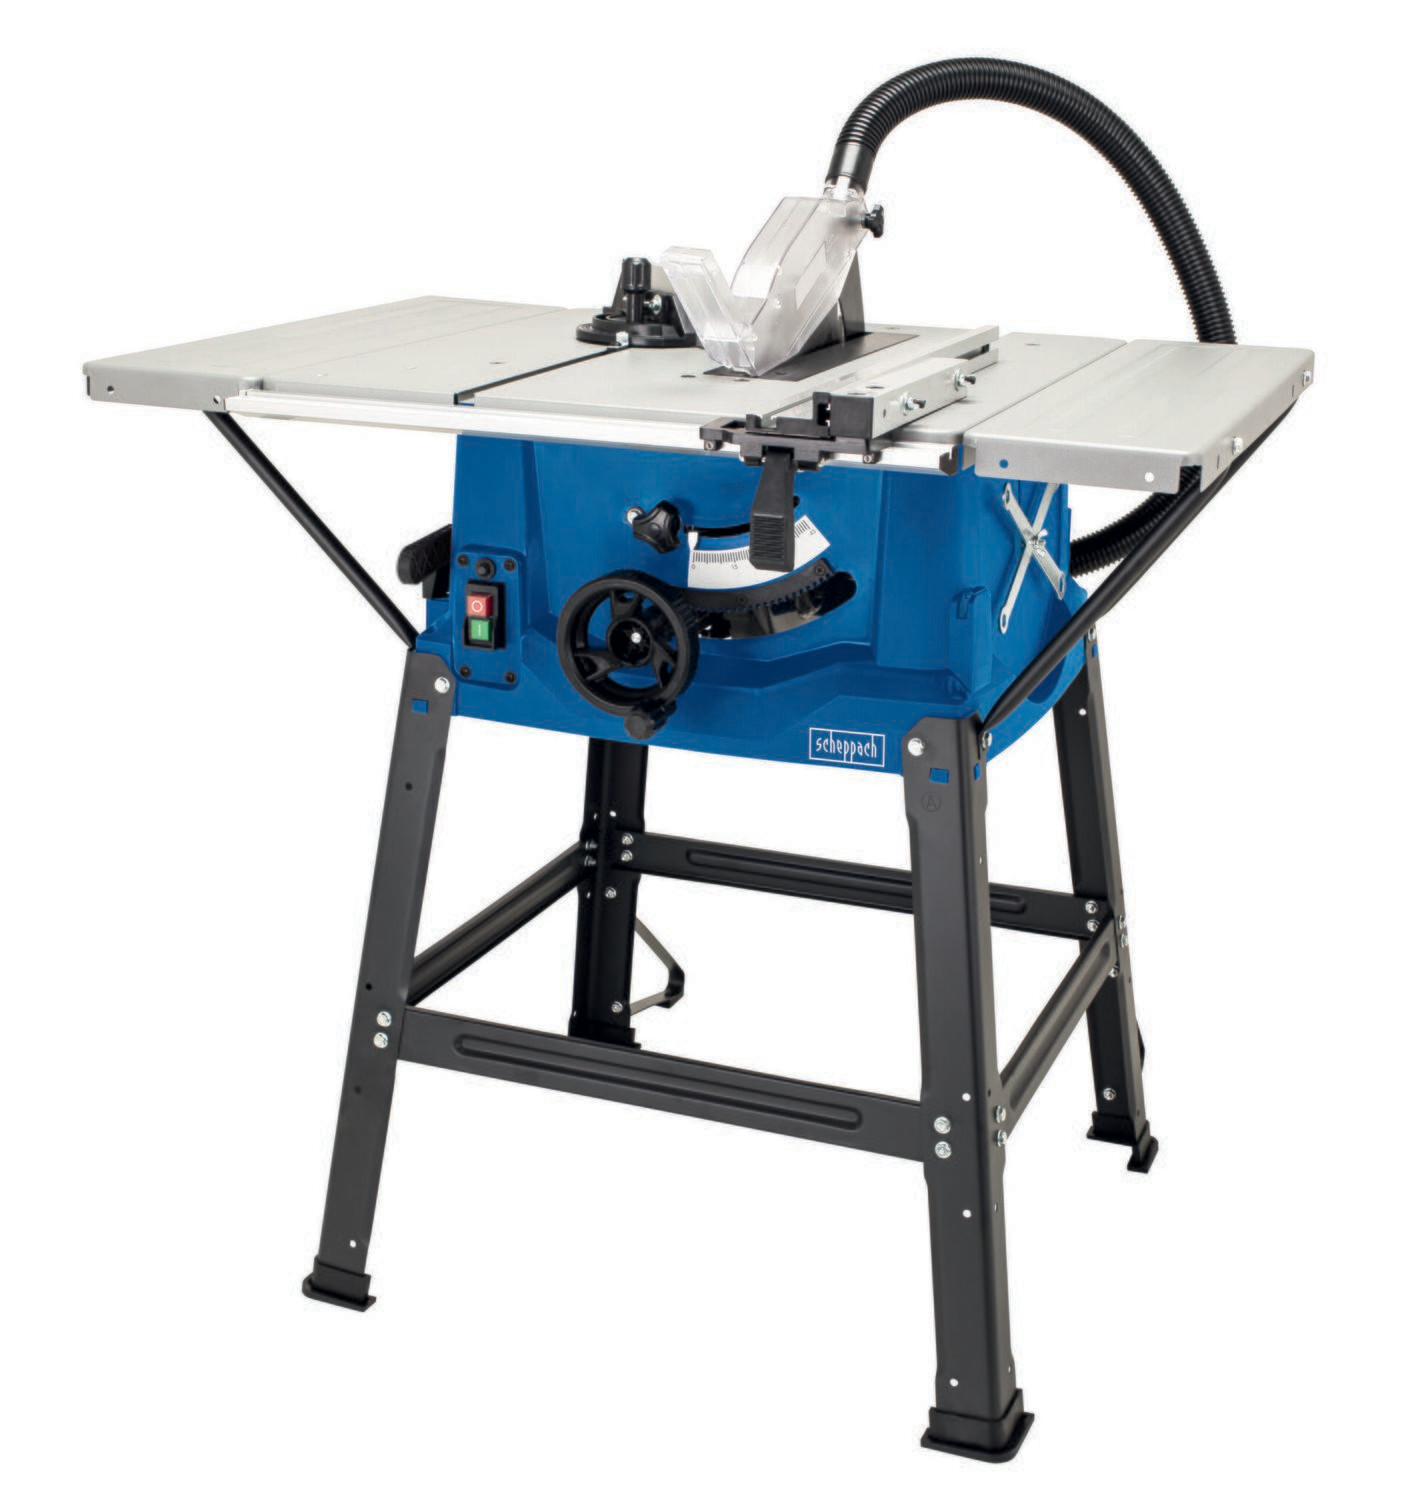 Scheppach HS100S 250mm Electric Table Saw 230v
( Available with free of charge UK mainland delivery)